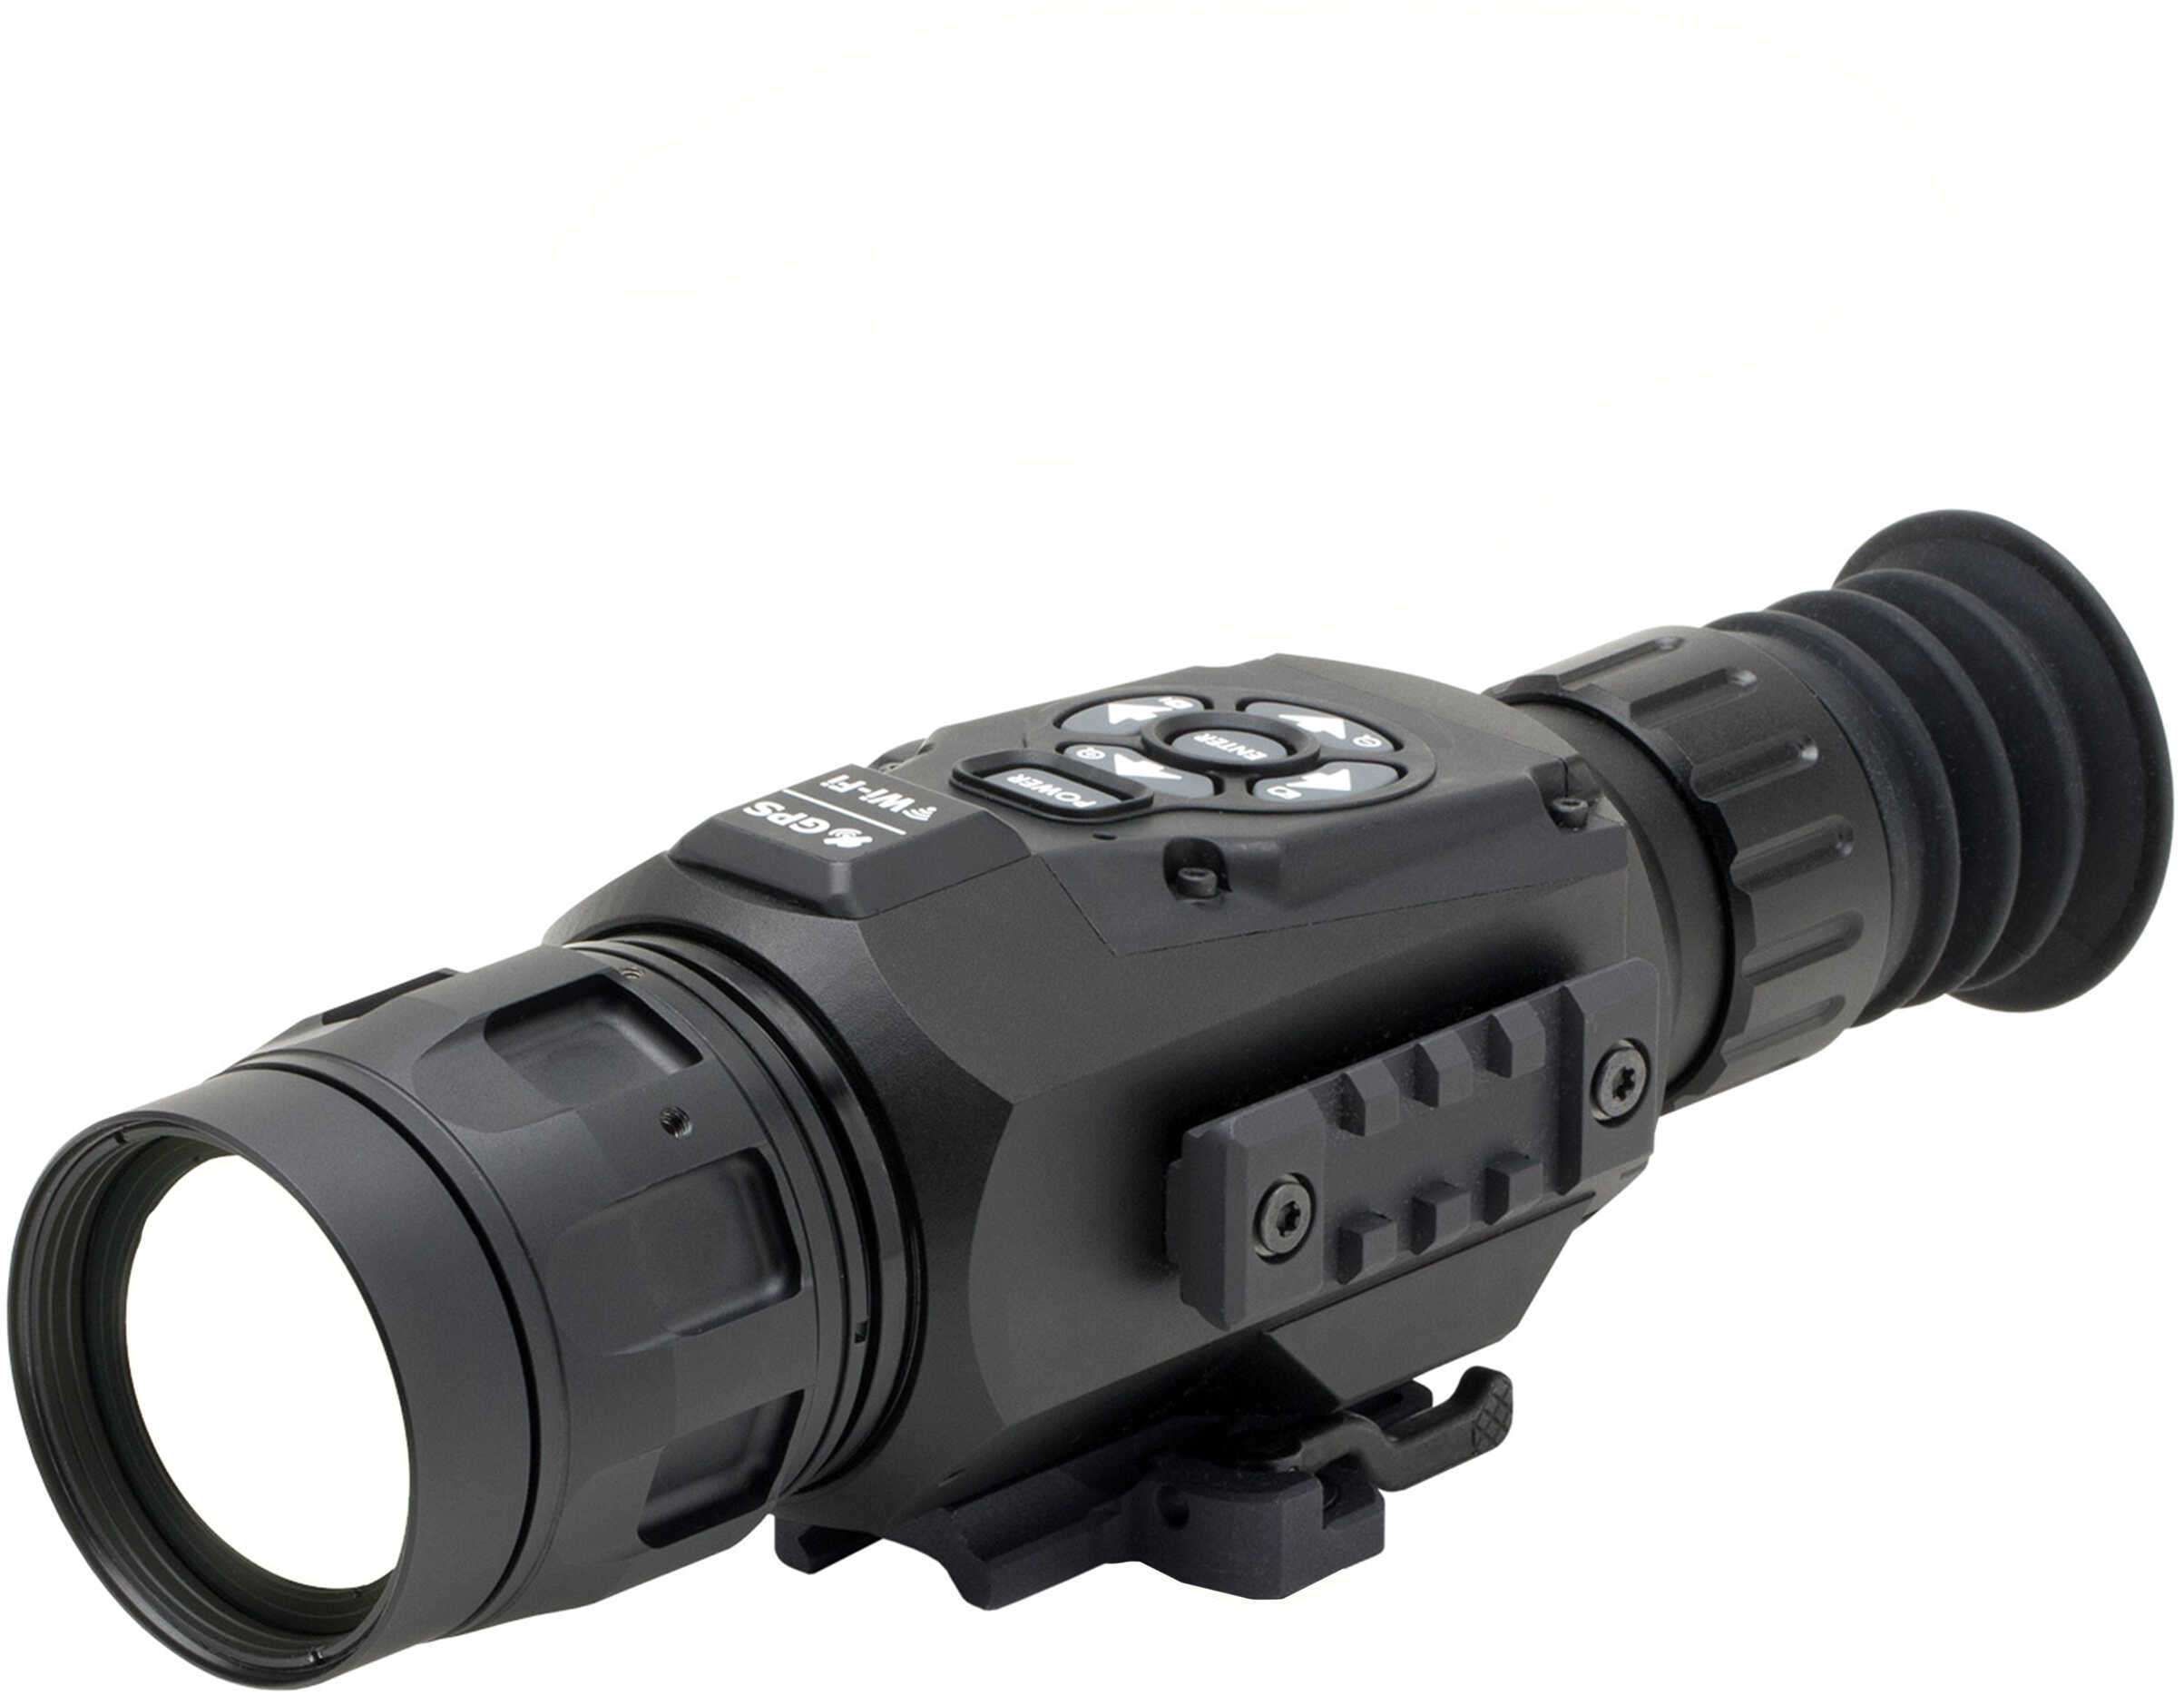 ATN ThOR-HD Thermal Weapon Sight 4.5-18X 384x288mm 50mm 5 Different Reticles In Red/Green/Blue/White/Black Black Finish